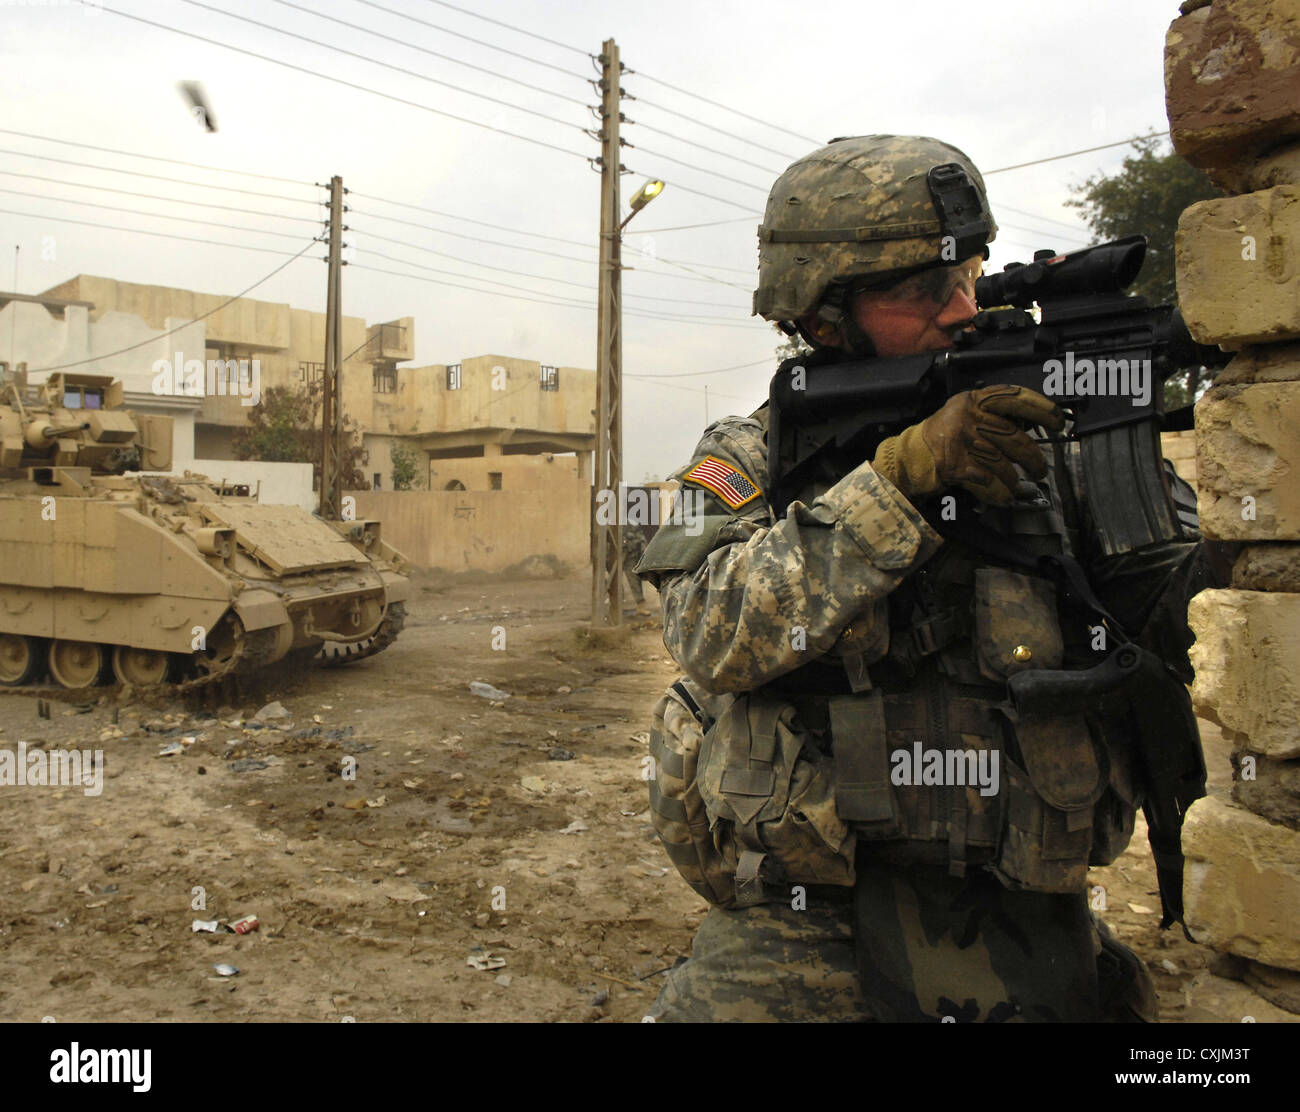 US Army soldiers from Bravo Company, 1st Cavalry Division during a firefight while on foot patrol February 151, 2007 in Buhriz, Iraq. Stock Photo